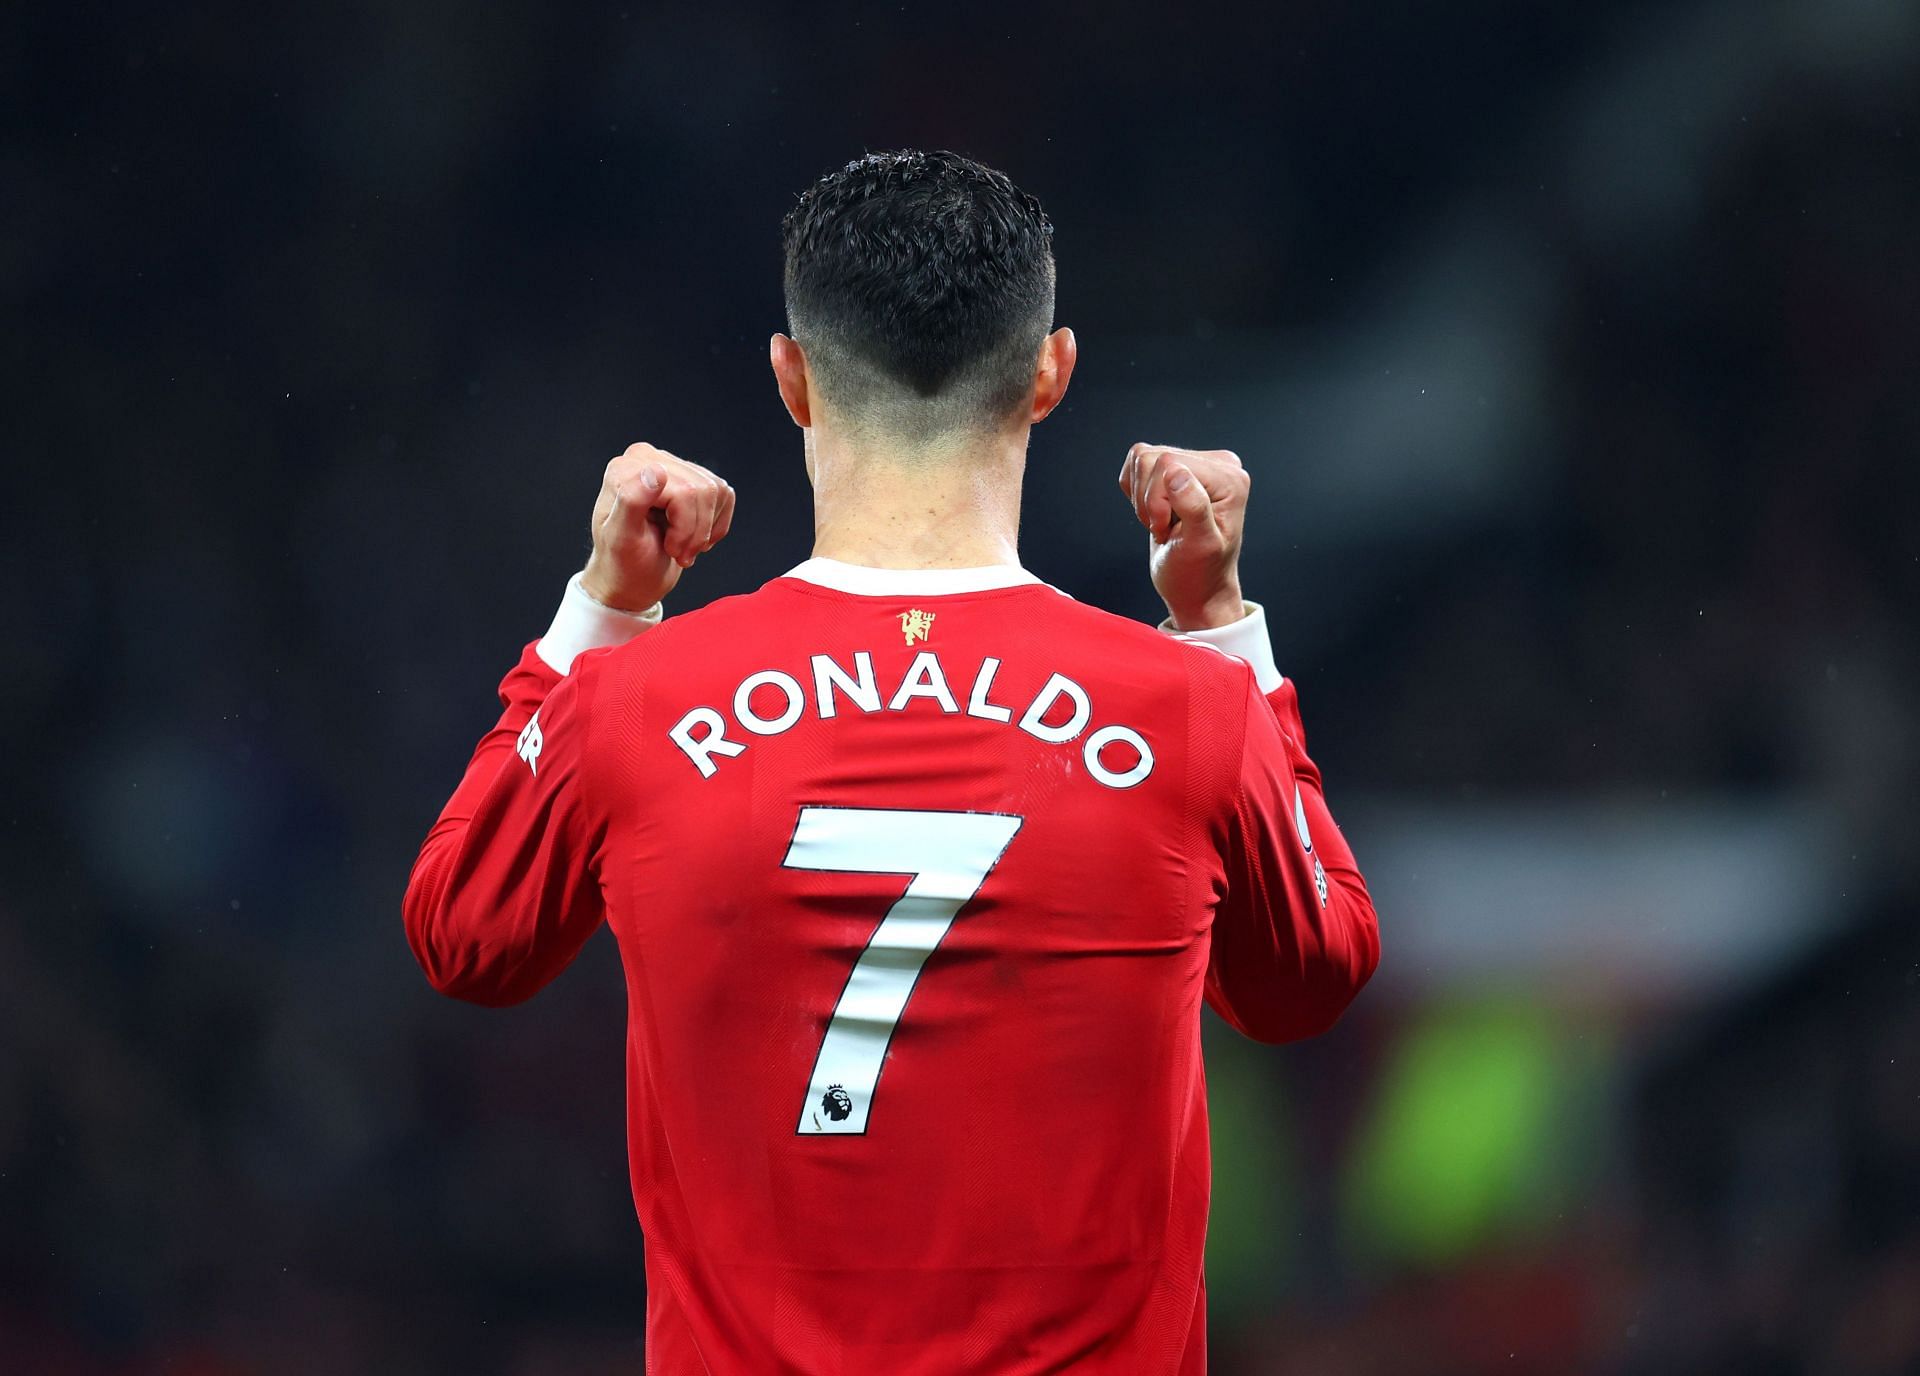 Cristiano Ronaldo looks likely to lead a new era for Manchester United